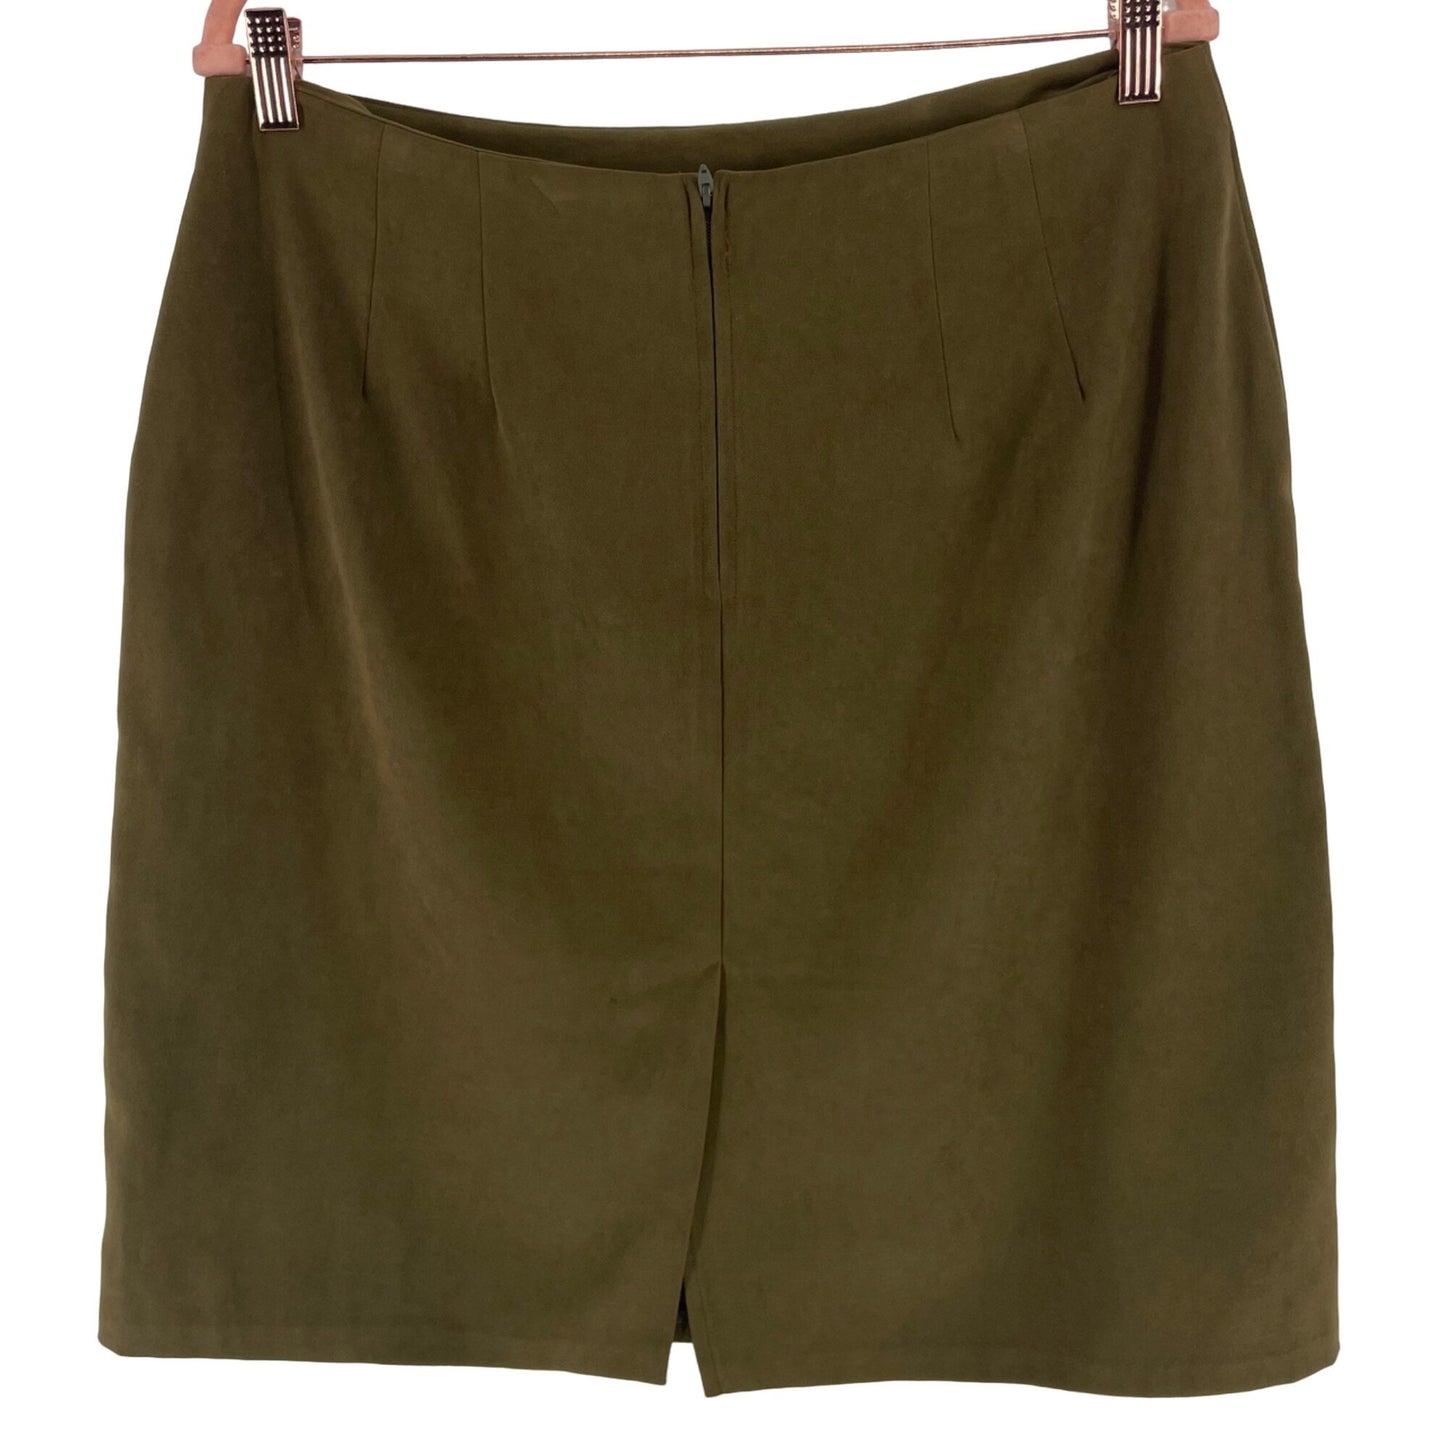 First Option Women's Size 14 Olive Green Skirt